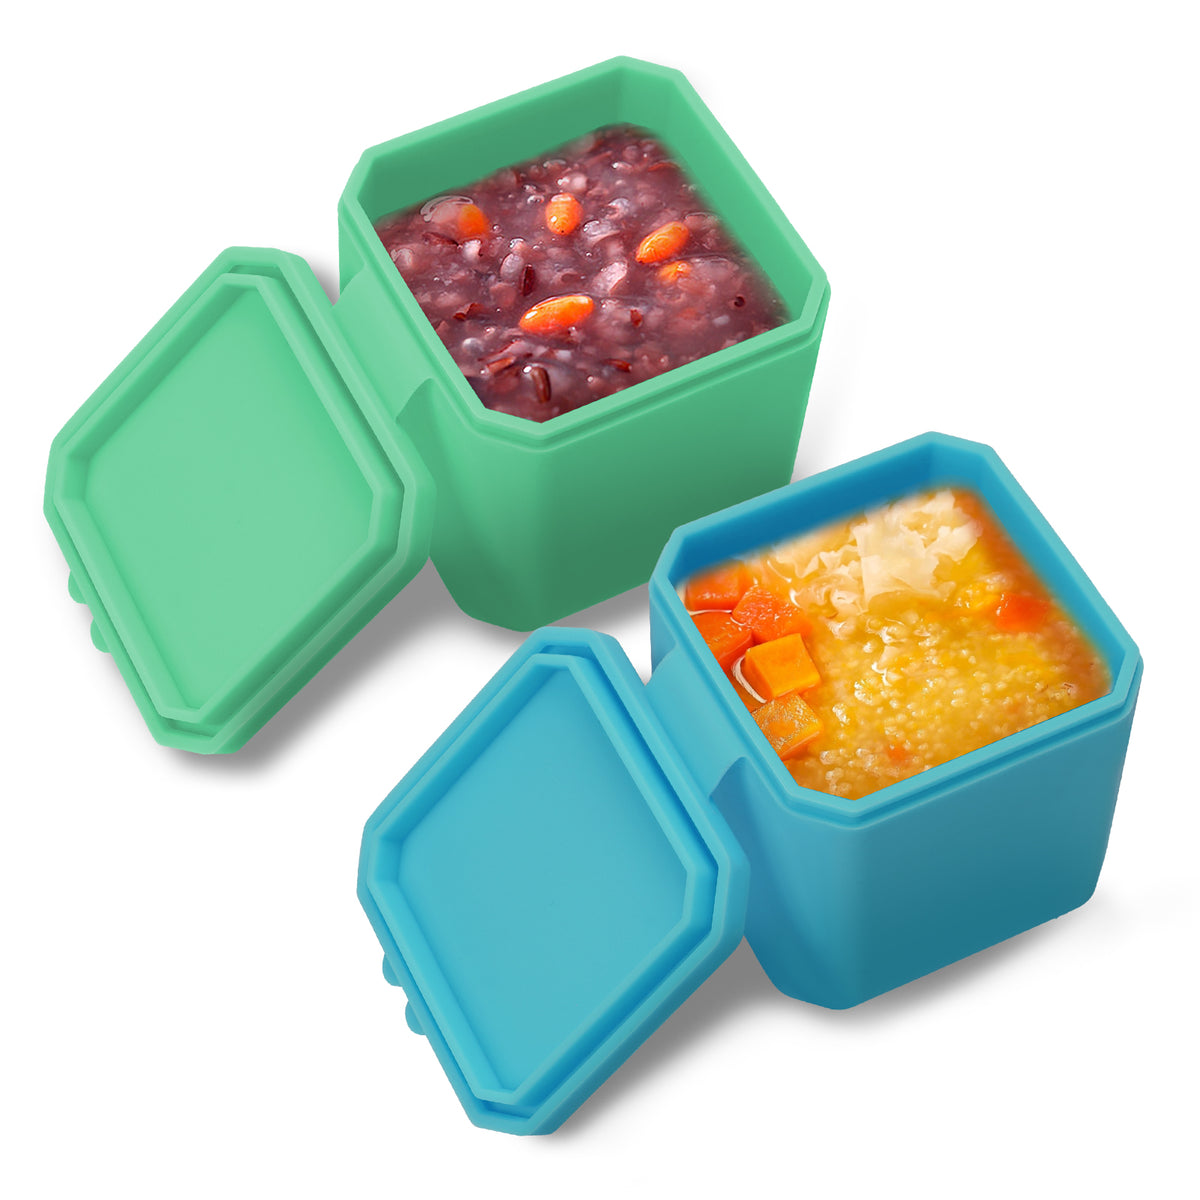 Adorila 2 Pack Small Silicone Snack Containers with Lids, Leak Proof Salad Dressing Container, Lunch Box Containers for School, Office, Travel, Picnic (Green, Blue)